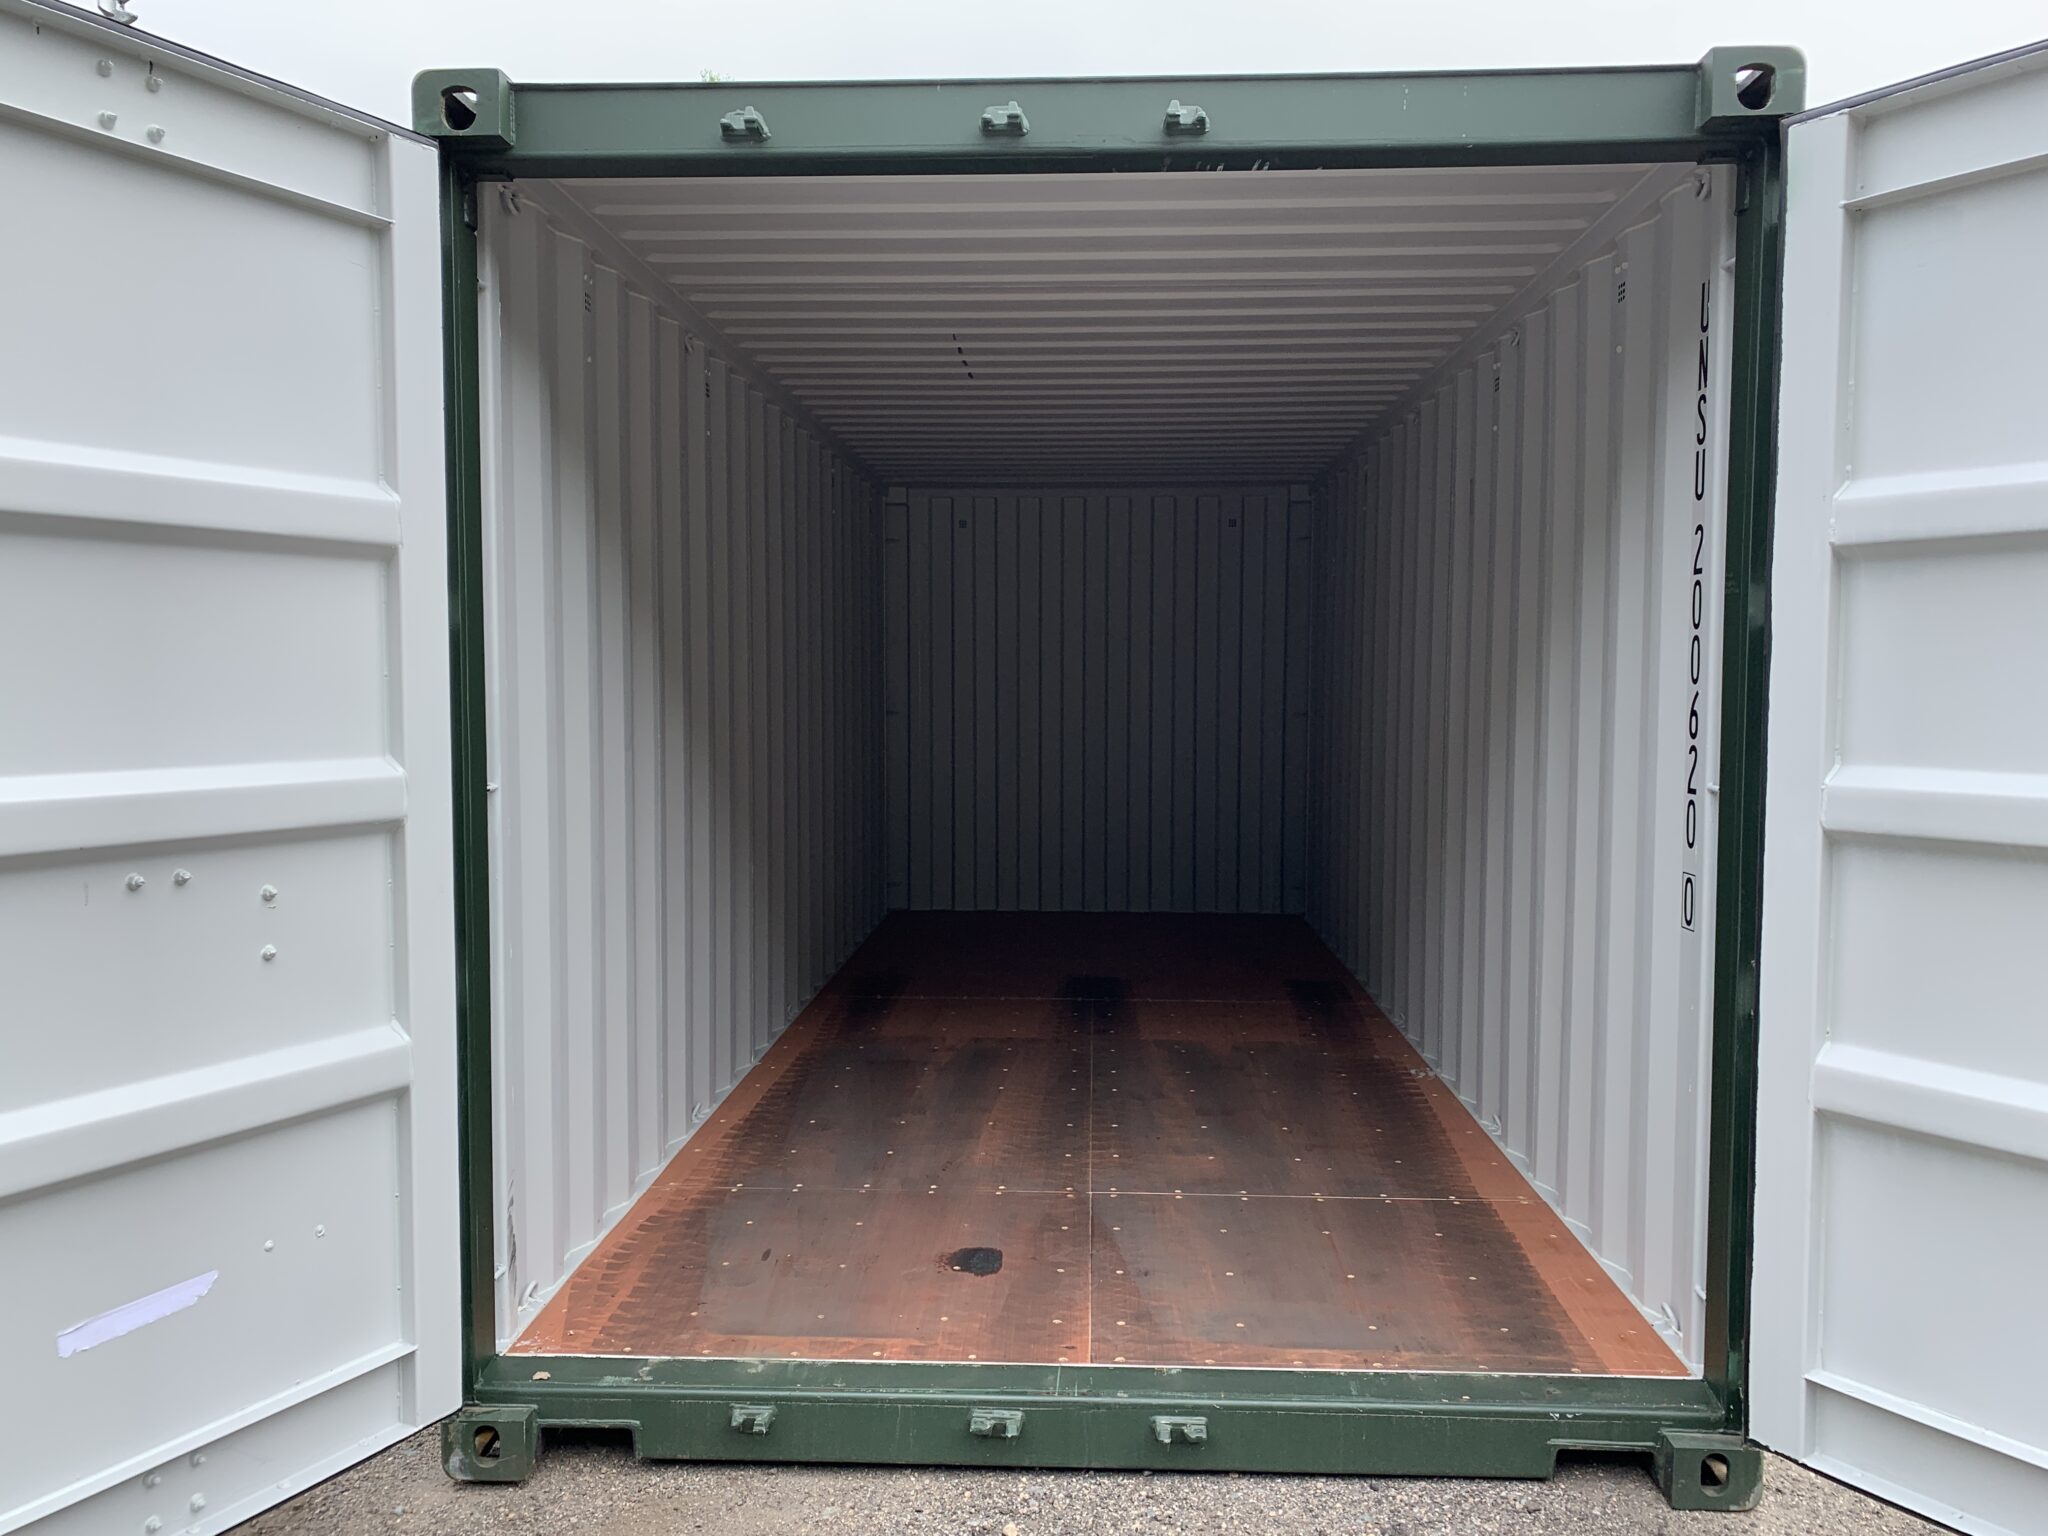 20′ x 8′ x 8.5′ Tall – New Shipping / Storage Container – Wind and